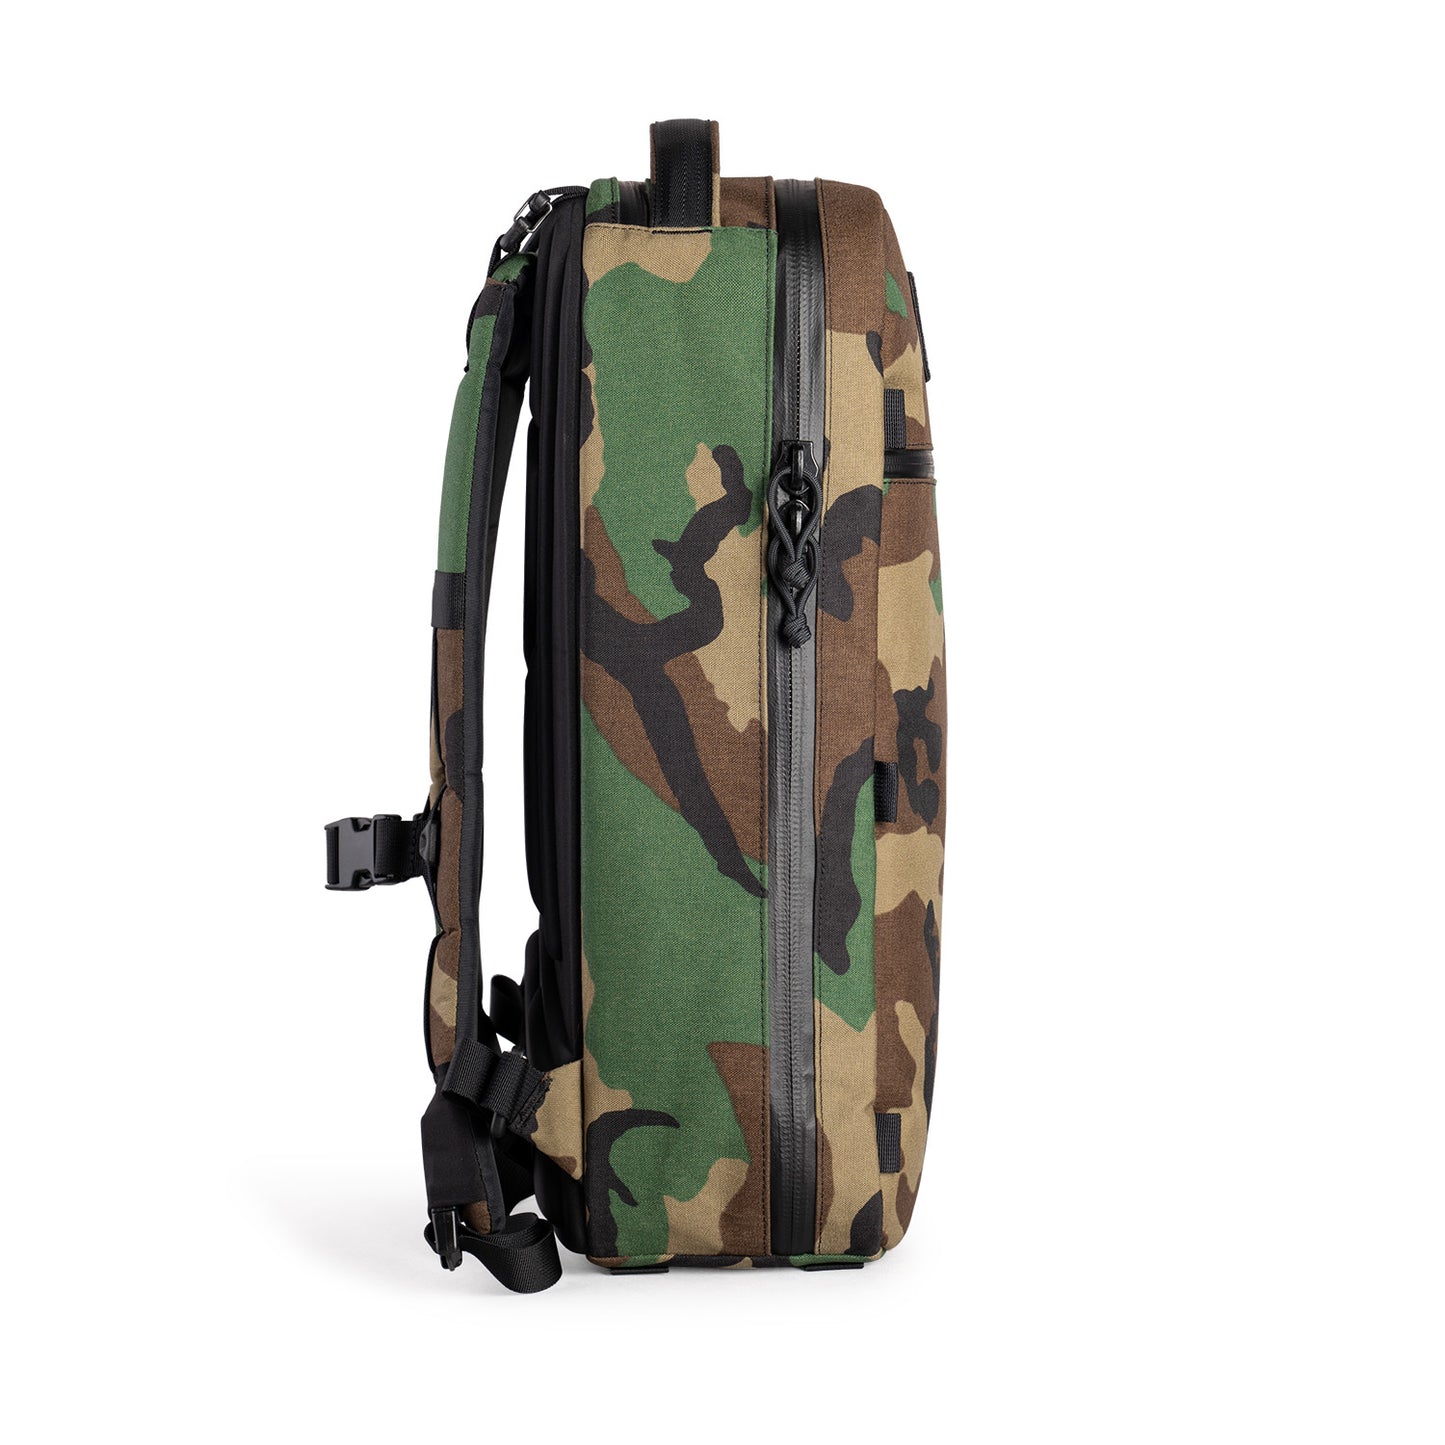 CT10 Backpack - X-PAC X50